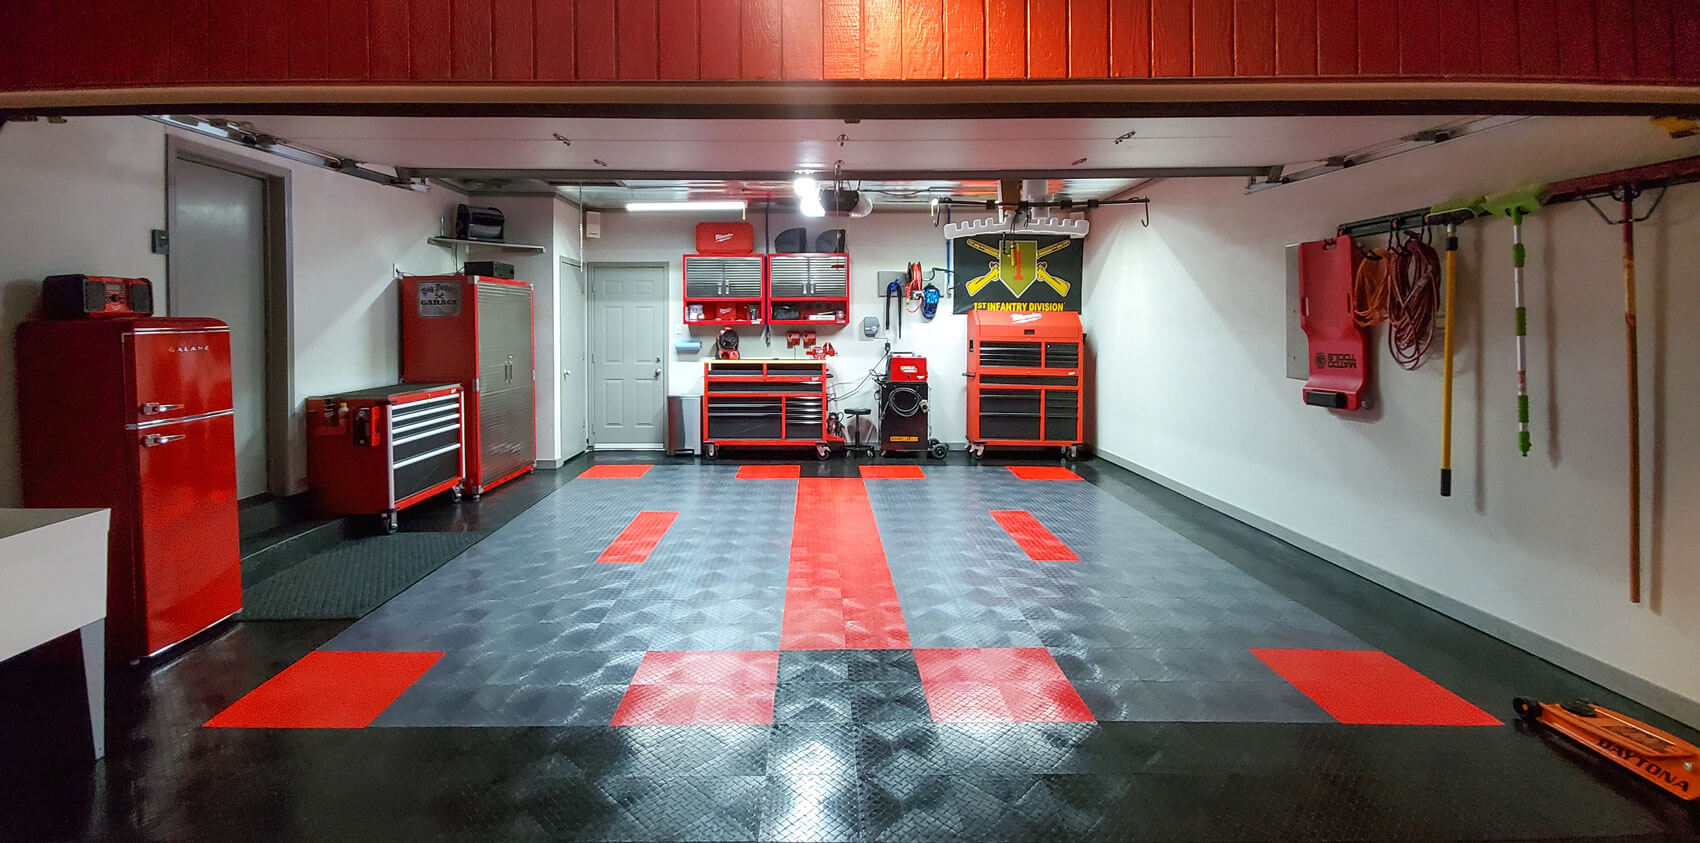 10 Ways to Take Your Garage to the Next Level - RaceDeck